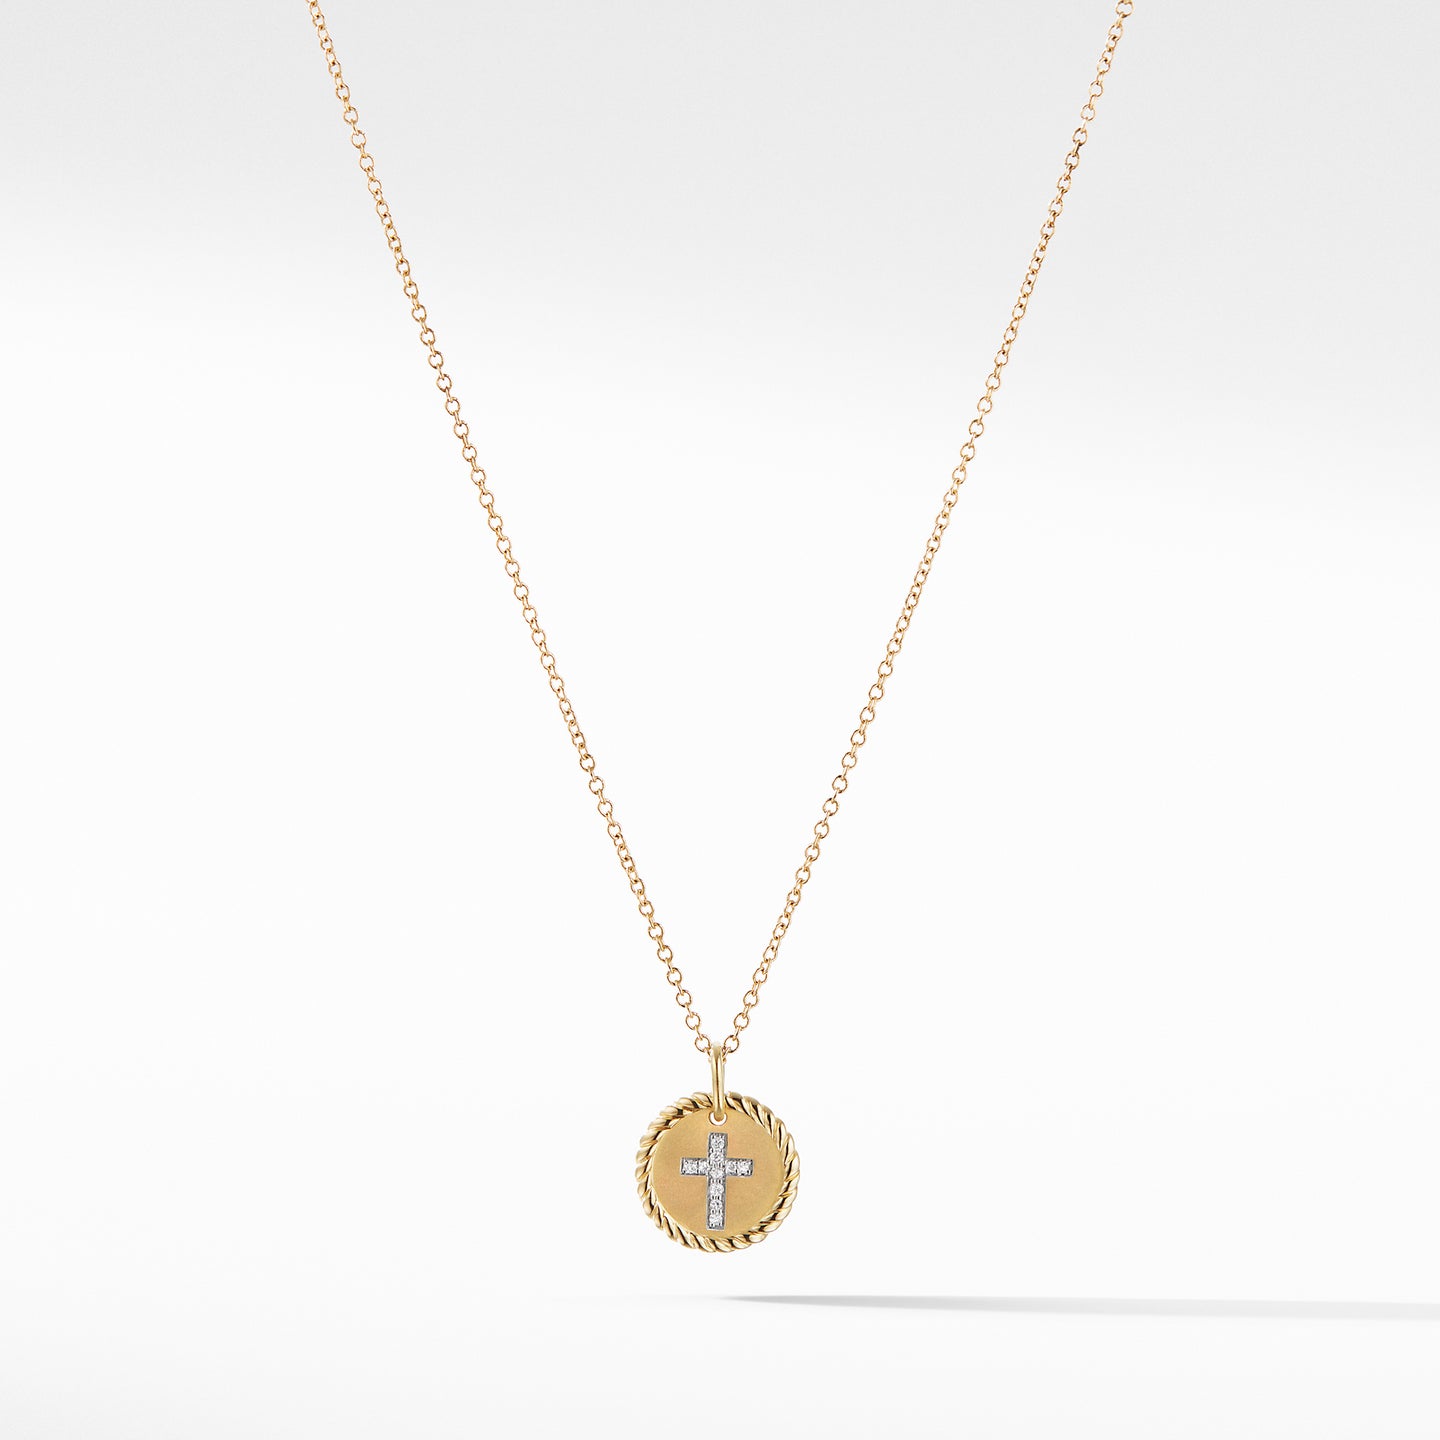 Cross Necklace with Diamonds in 18K Gold, 18